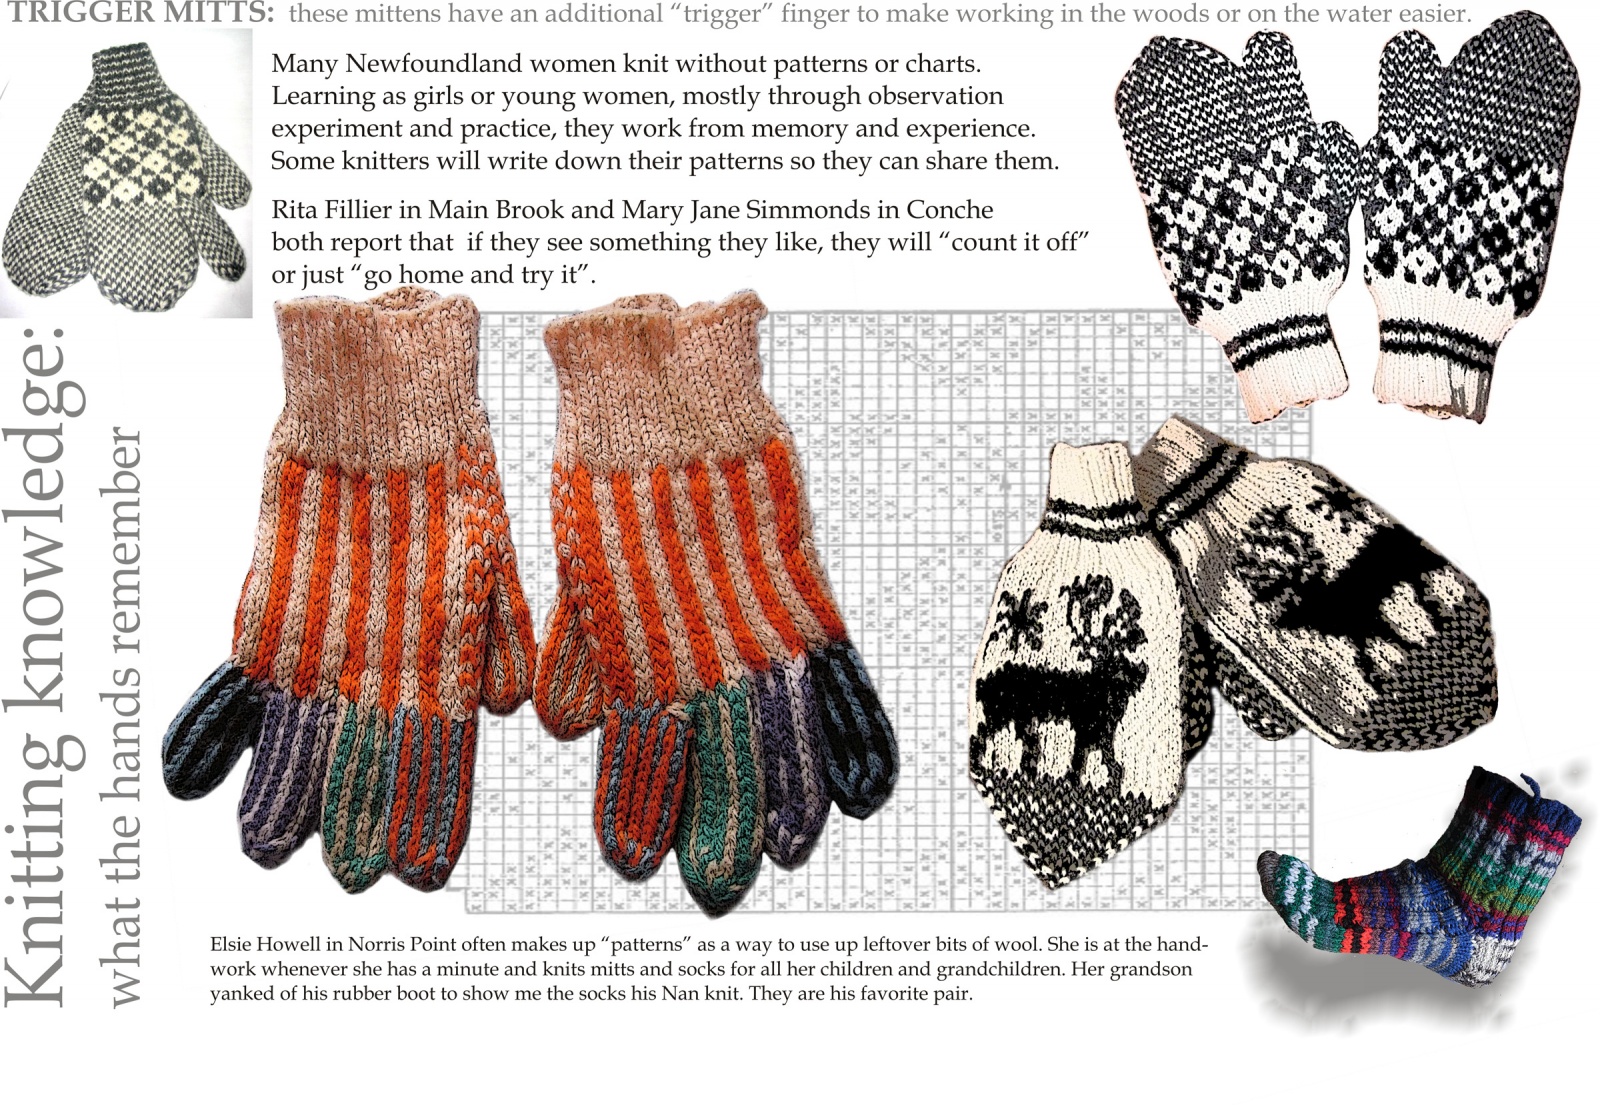 Knitting Knowledge: what the hands remember